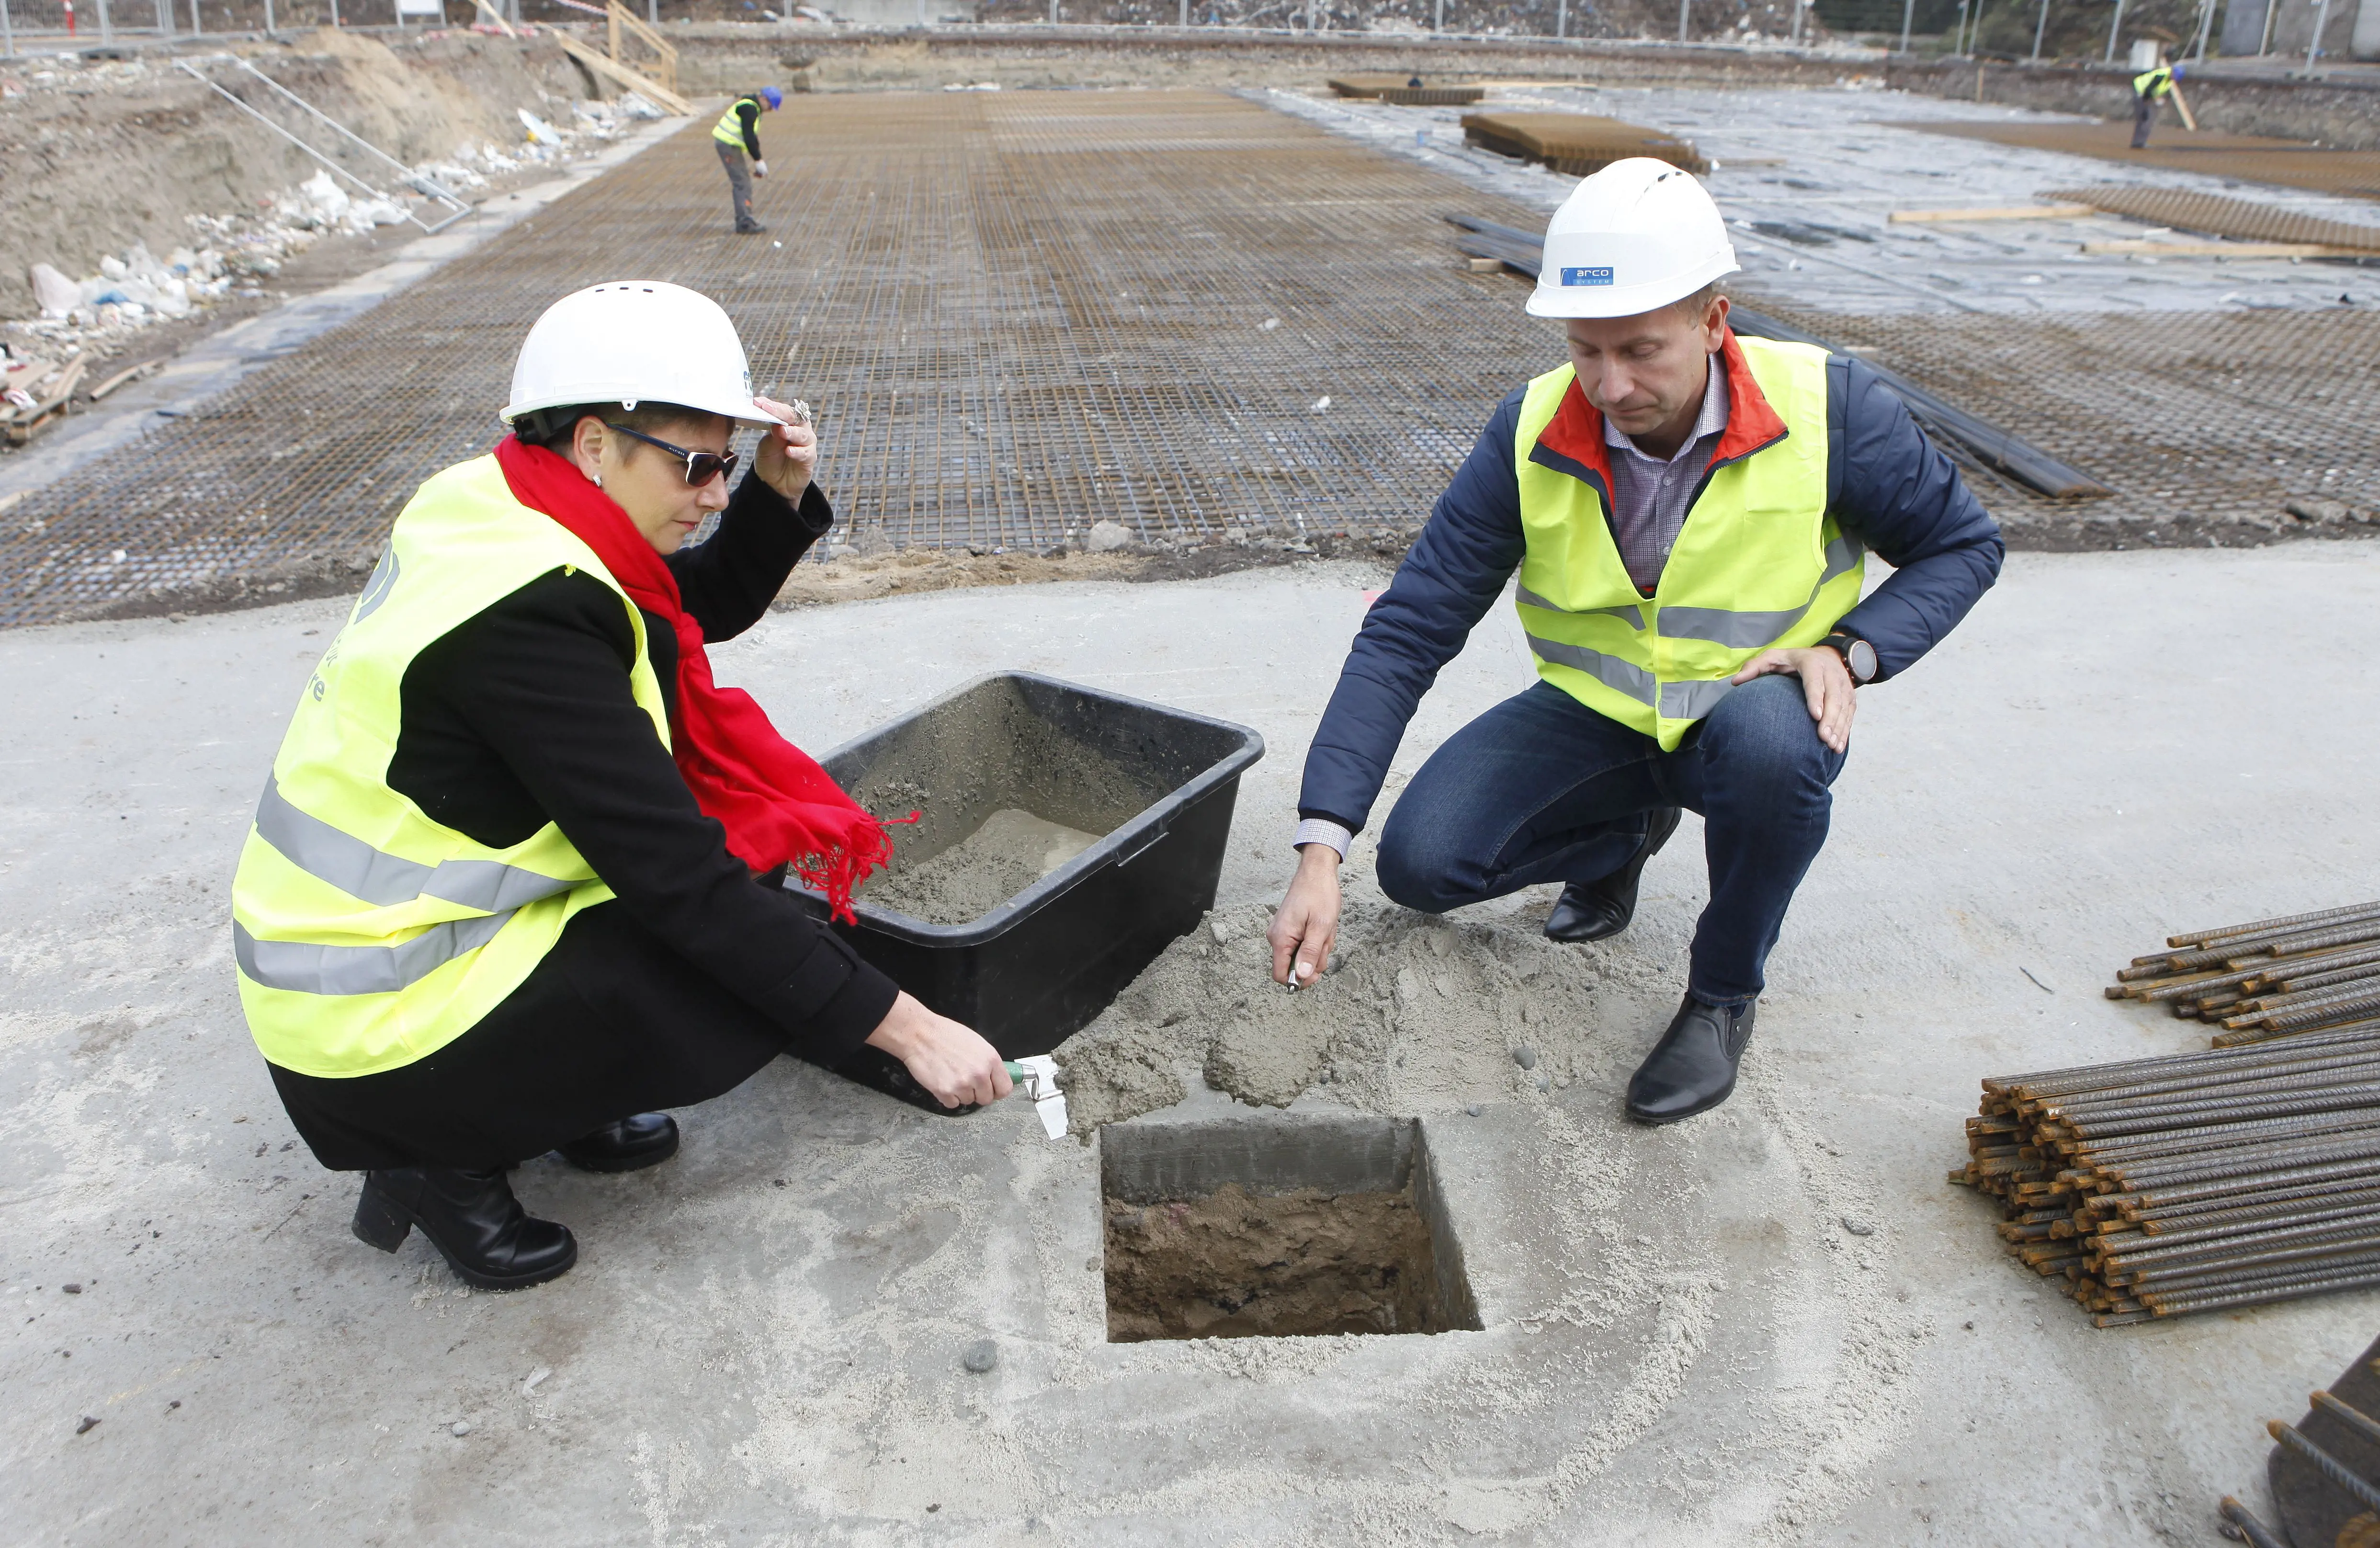 FCC Zabrze: Foundation stone ceremony for air-tight sealing of the installation  